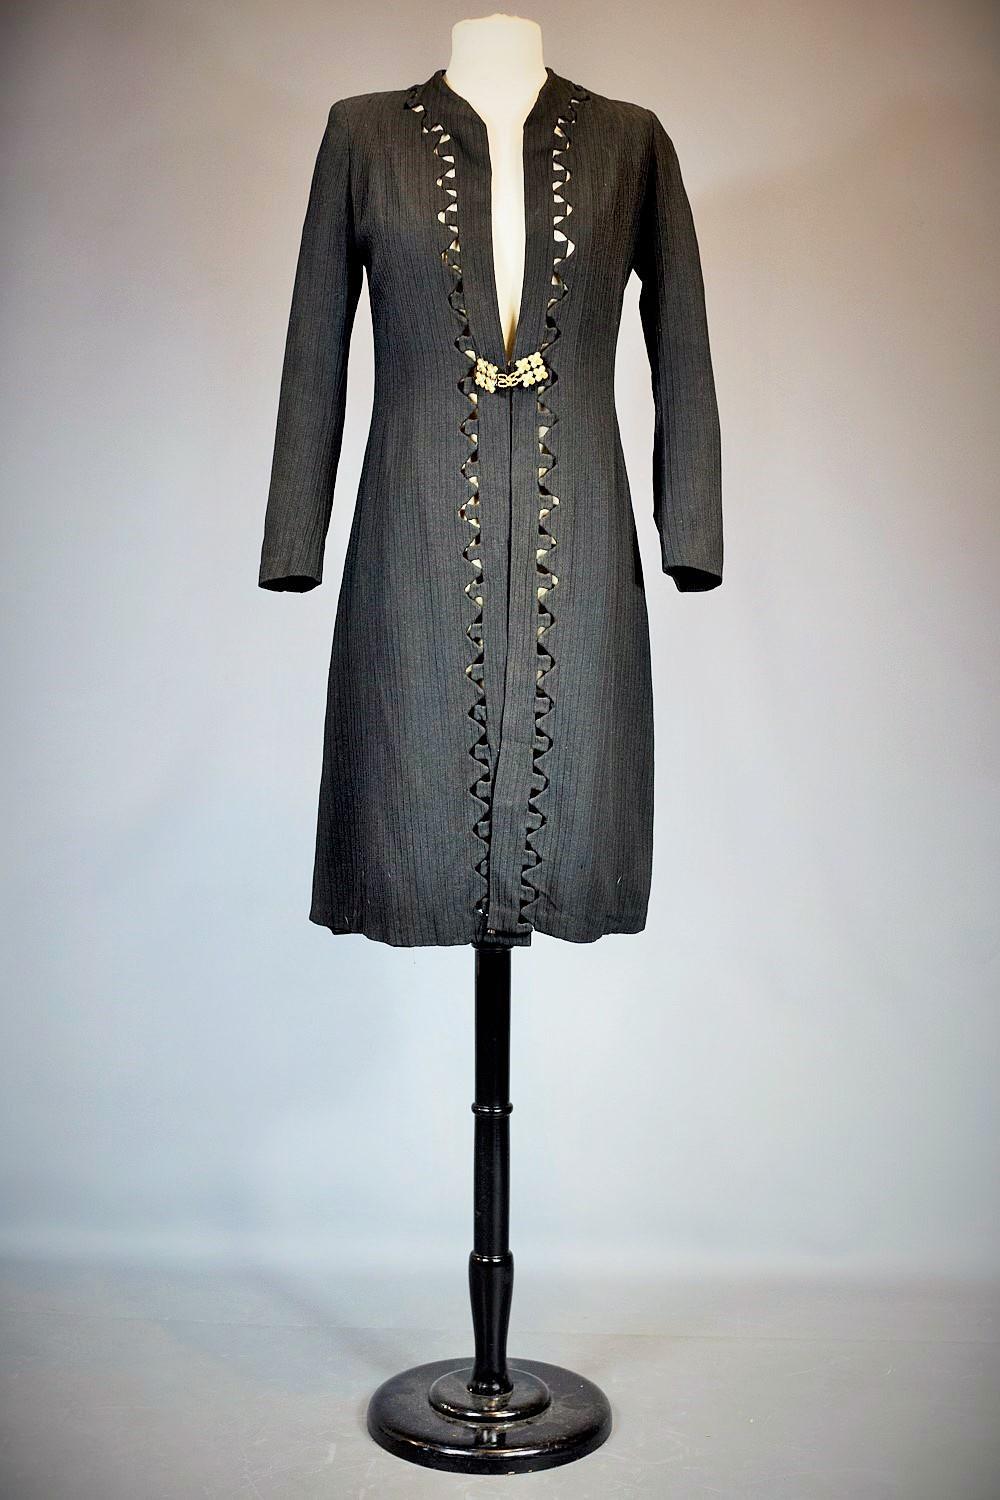 Elegant Openwork Wool Crepe Evening Coat - France Circa 1935-1945 In Good Condition For Sale In Toulon, FR